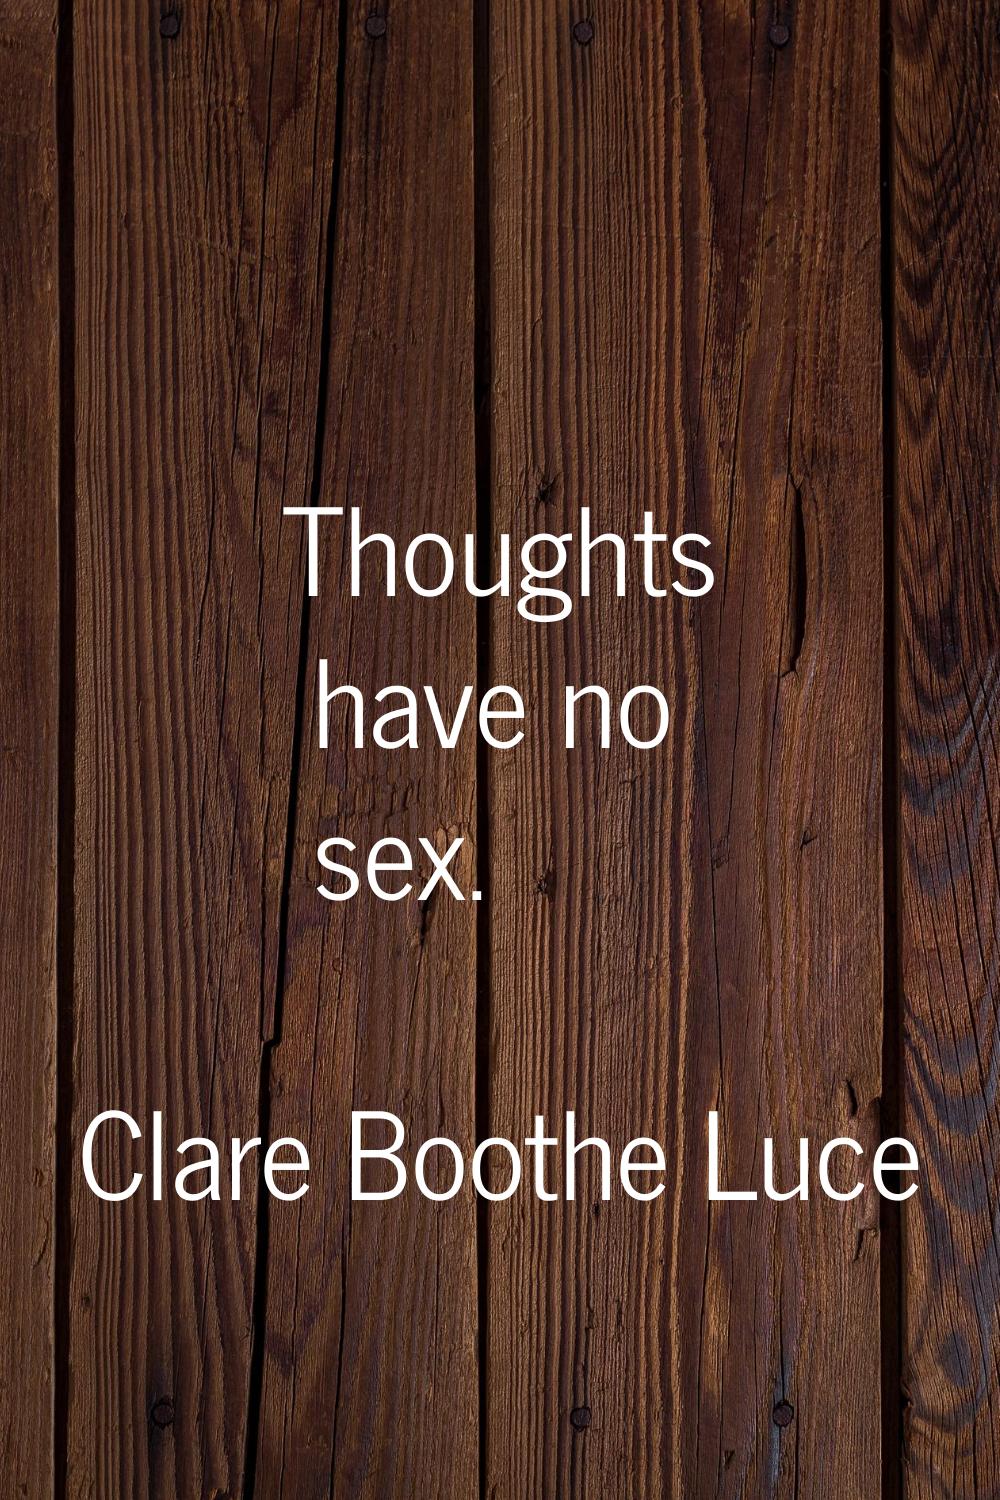 Thoughts have no sex.